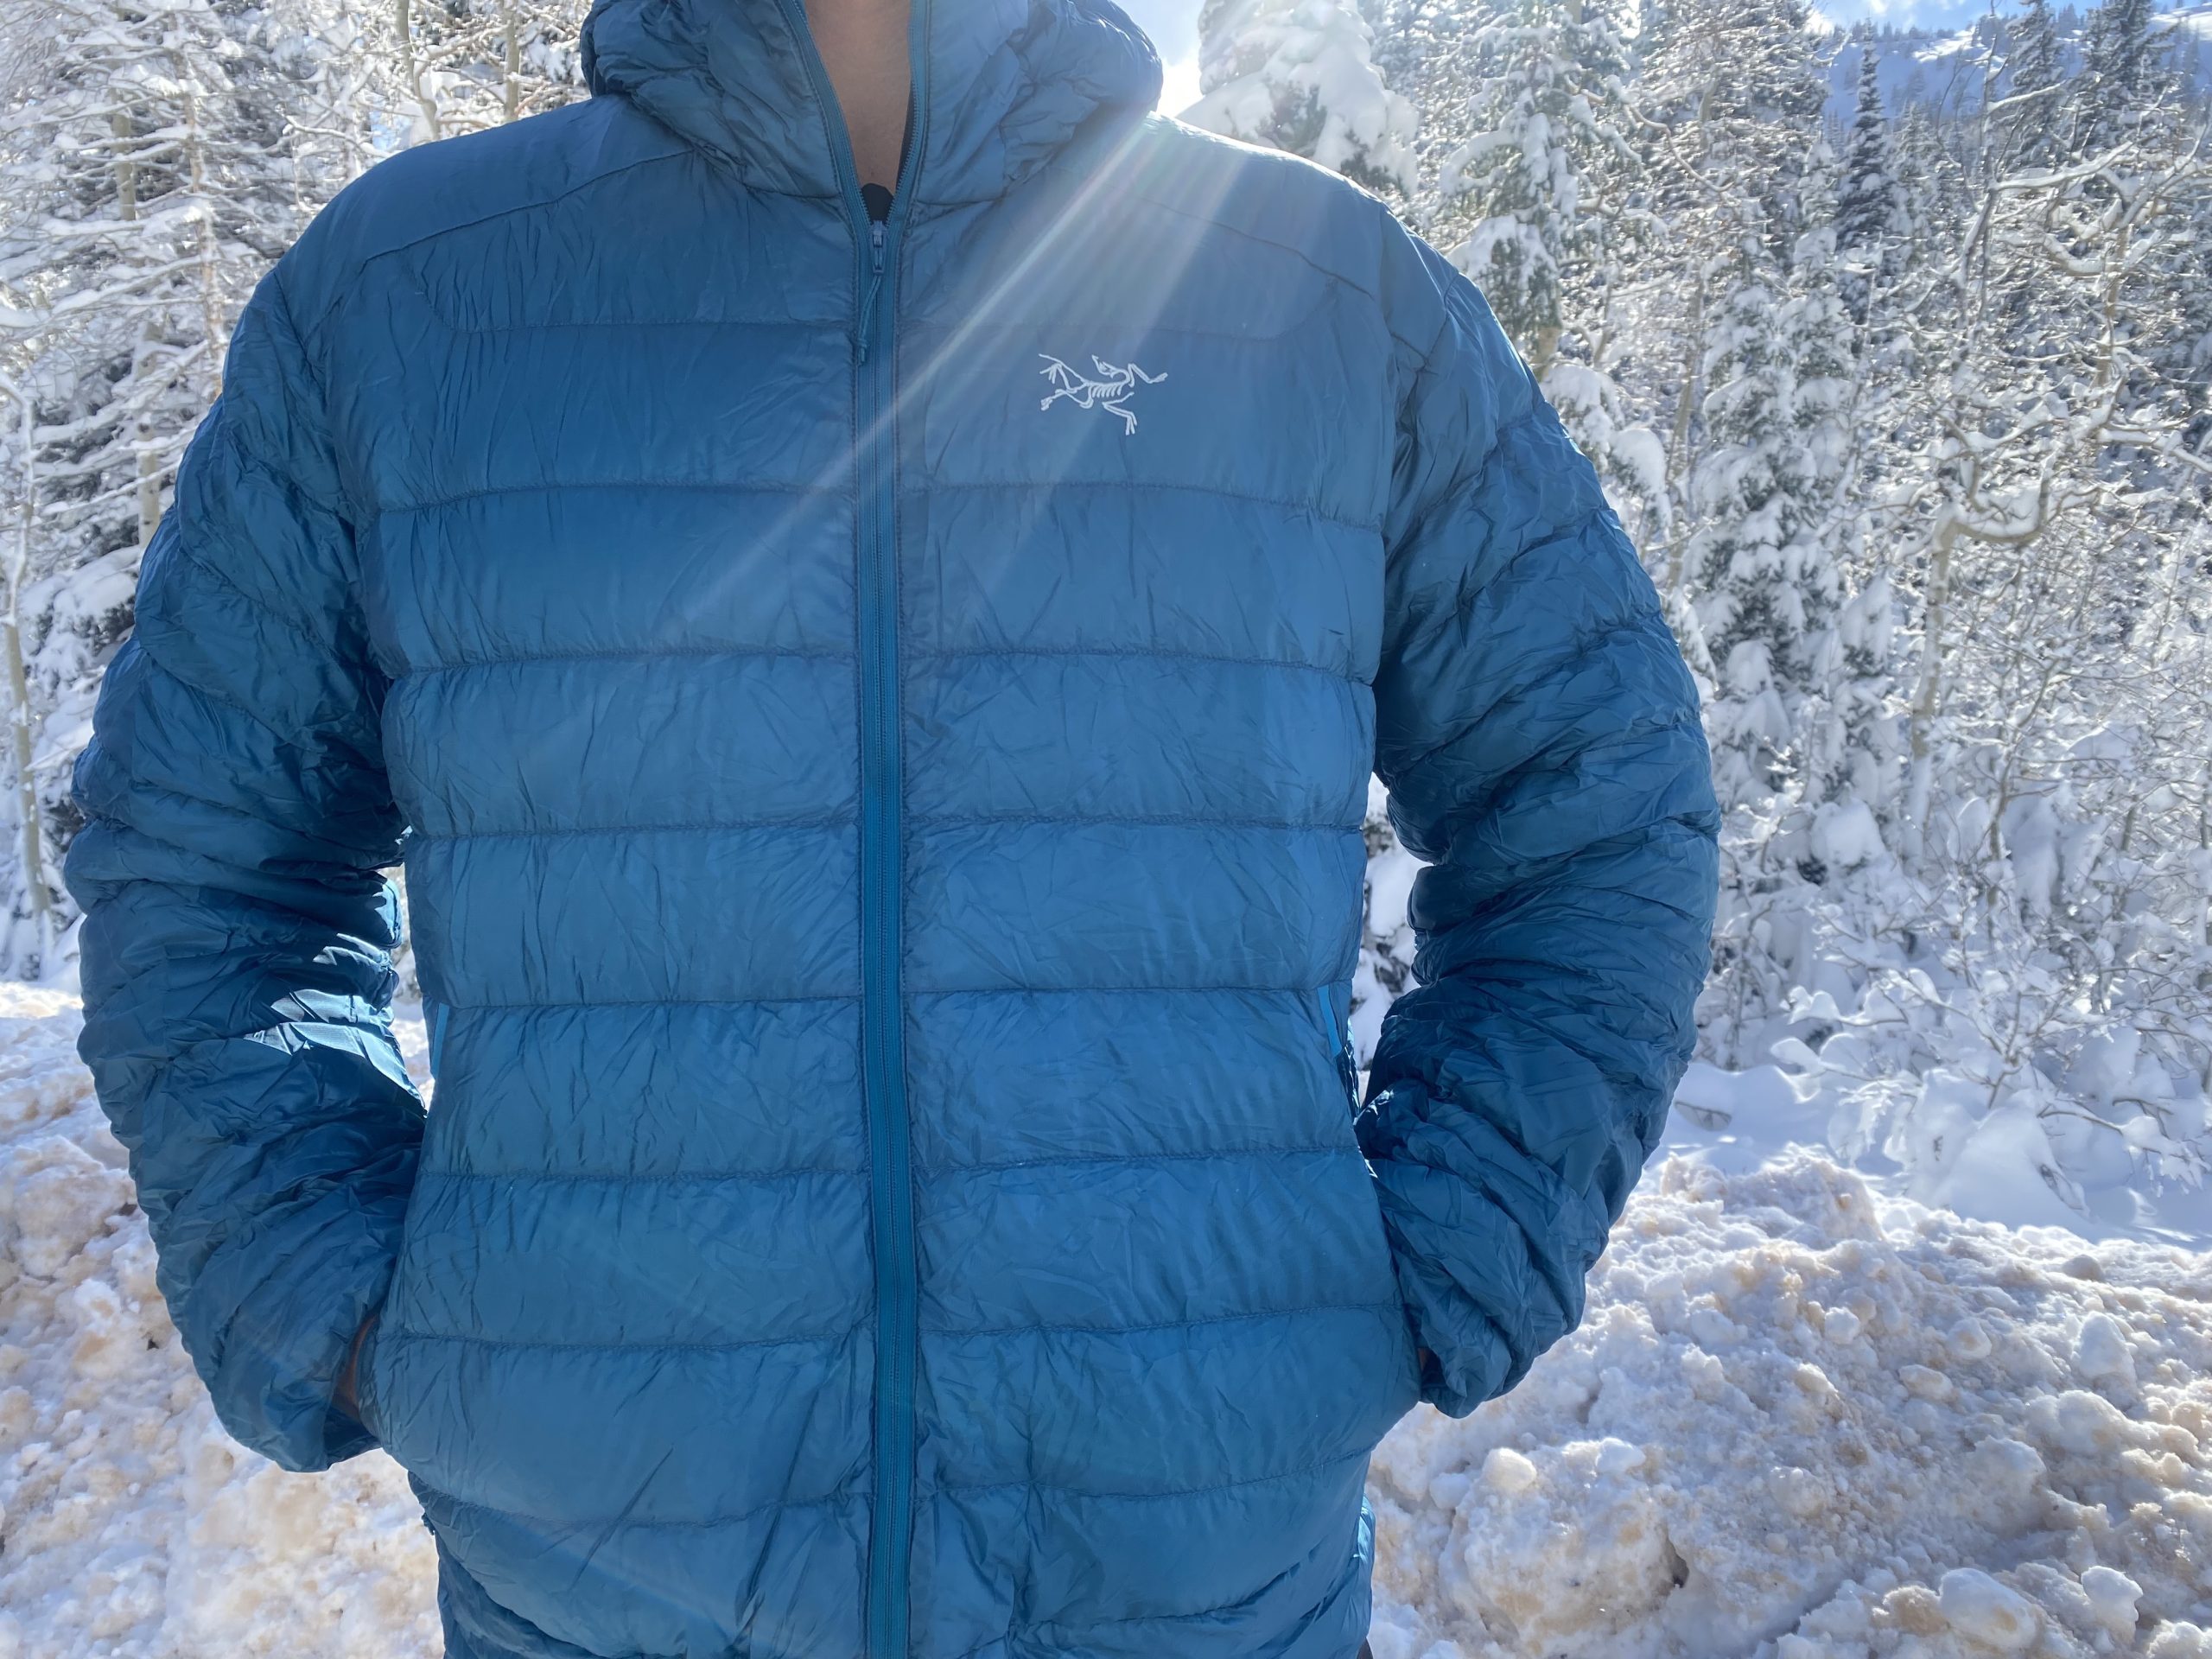 [GEAR REVIEW] Arc’teryx Cerium Hoody—Dependable When You Need it Most ...